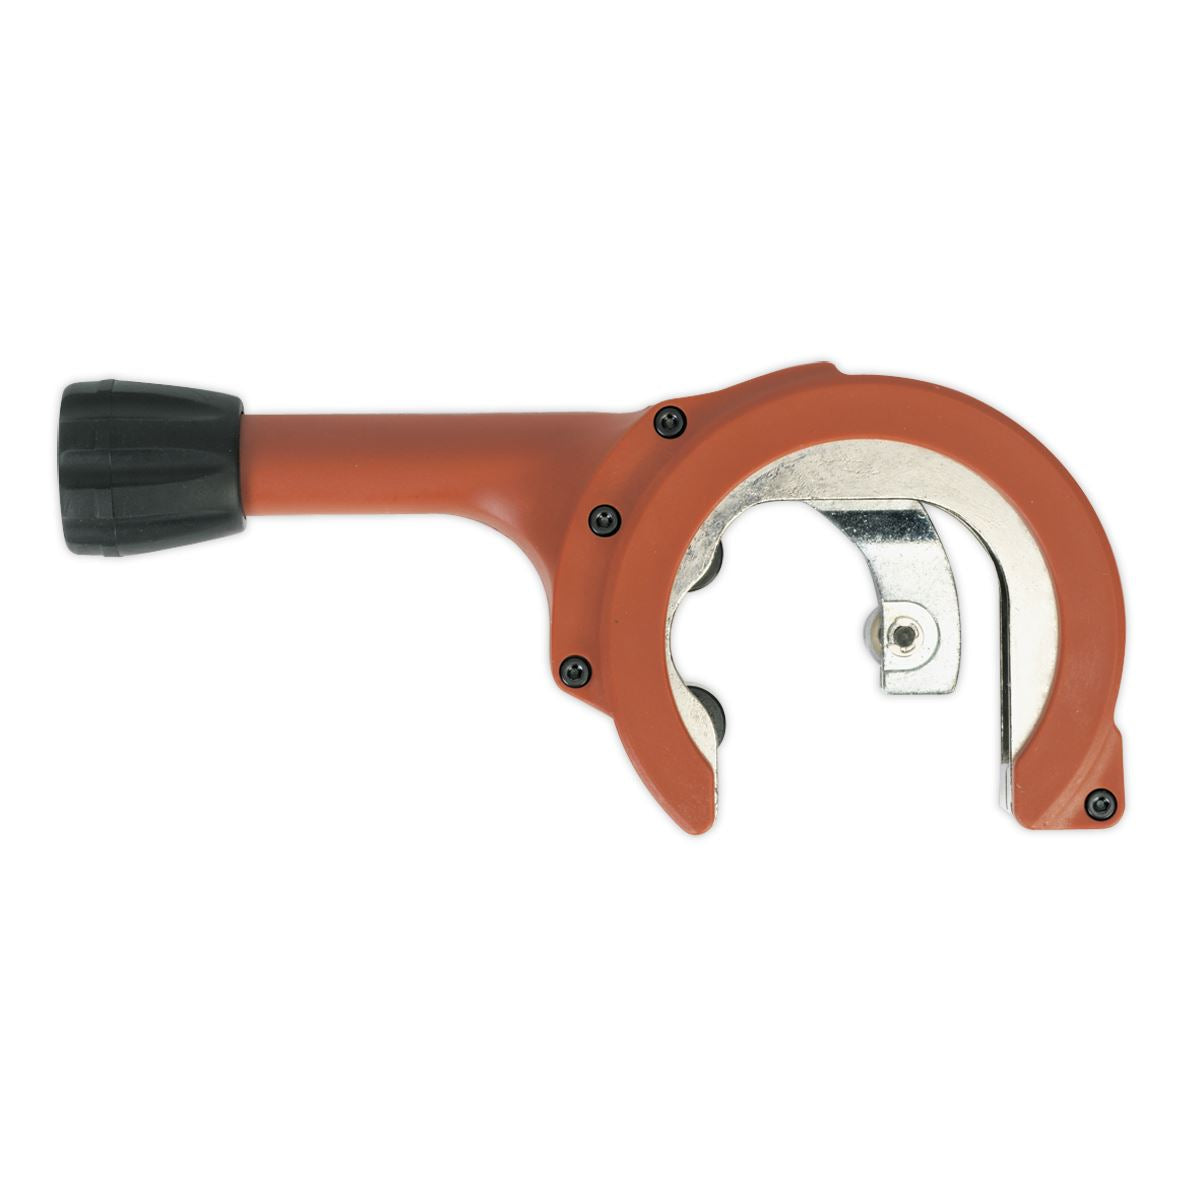 Sealey Exhaust Pipe Cutter Ratcheting